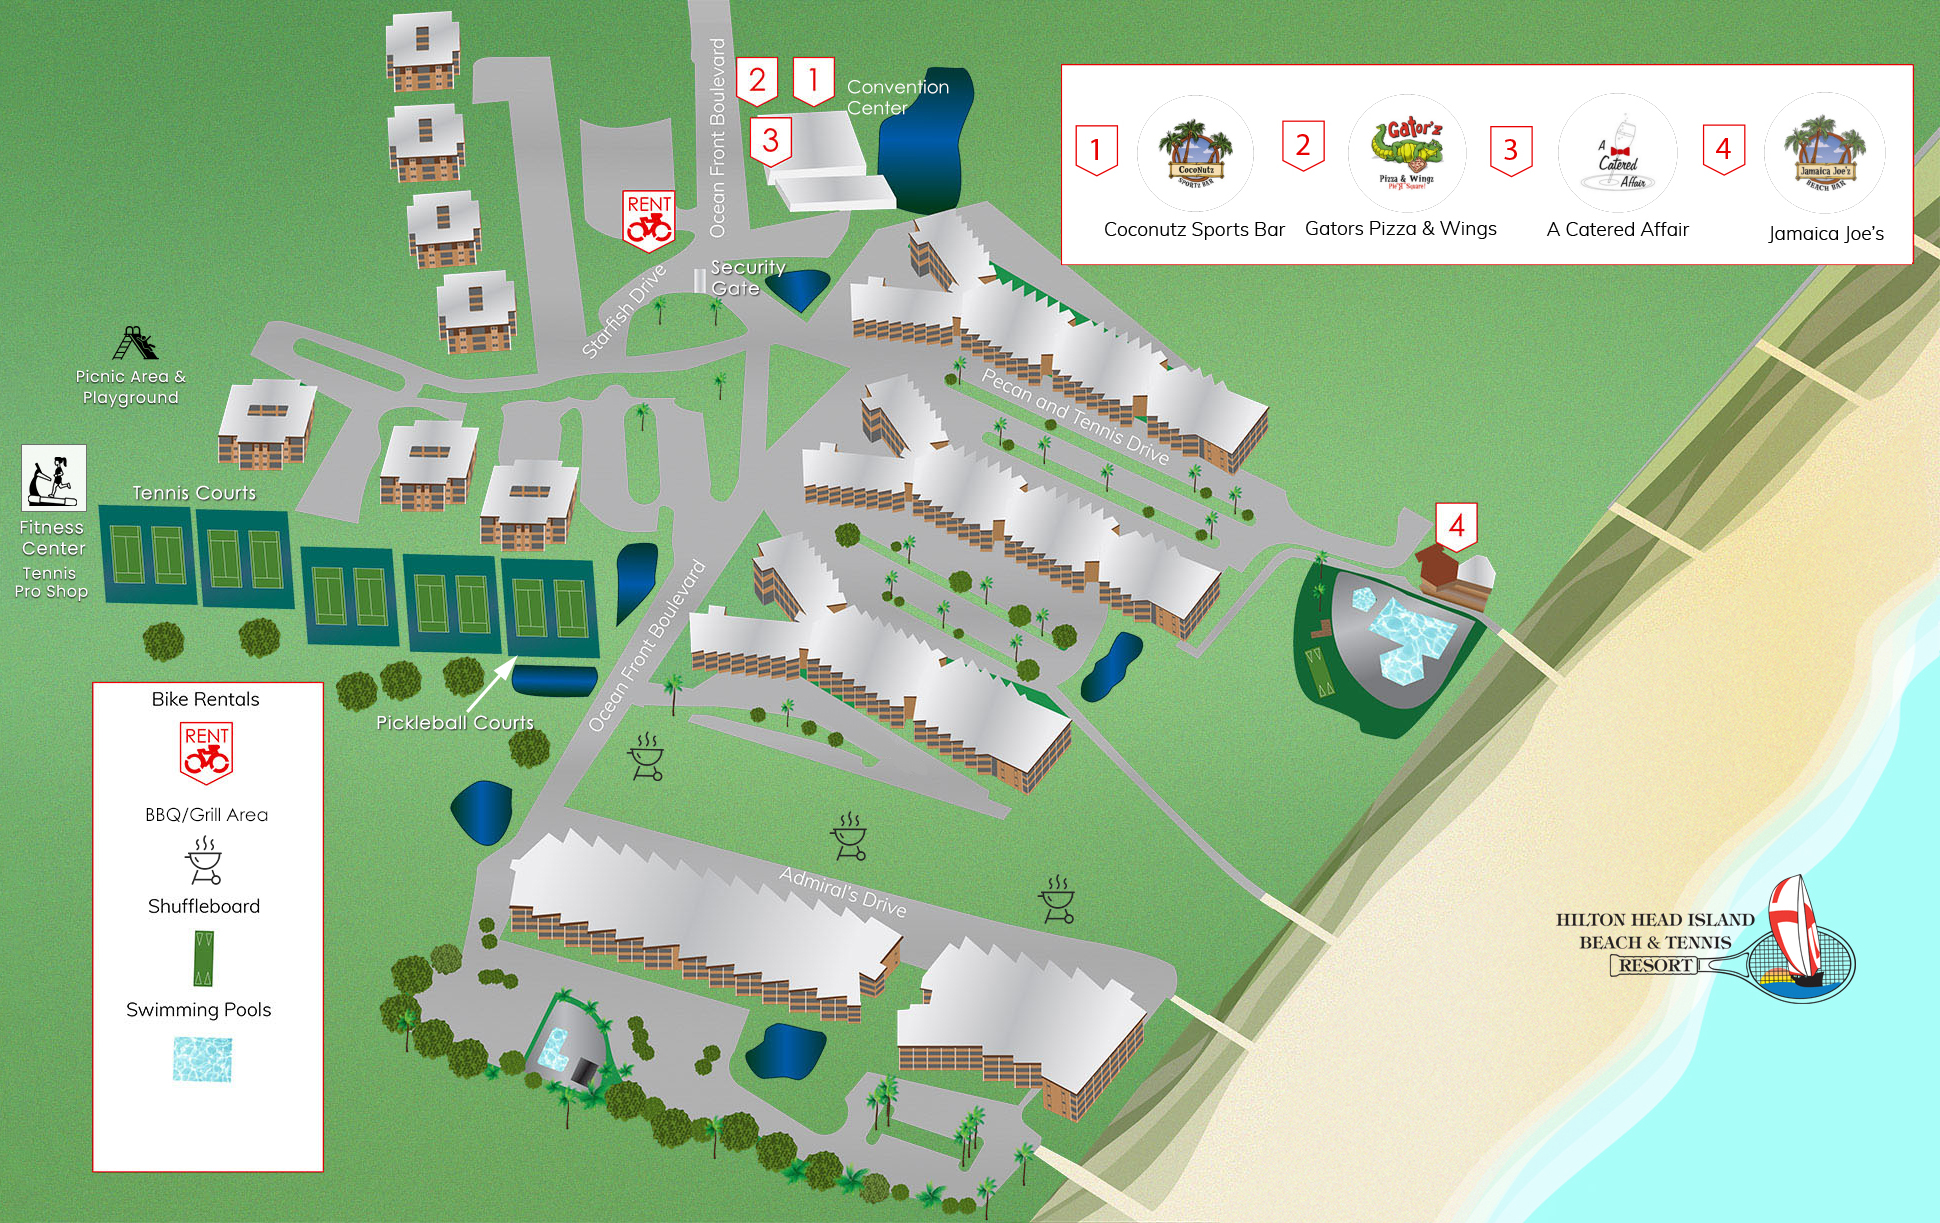 Resort Map inlcuding features